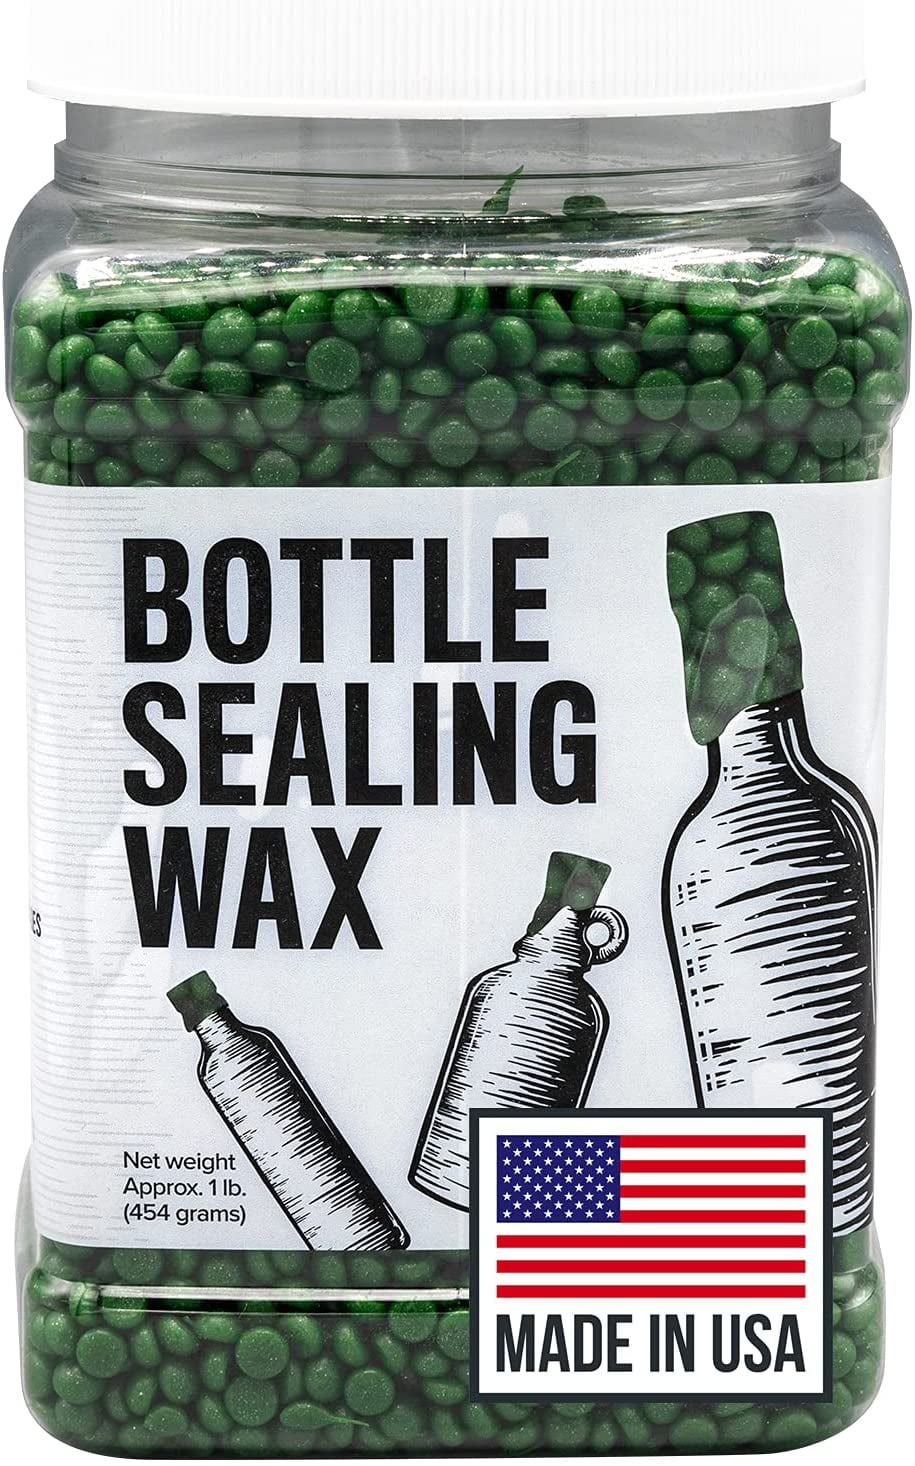 Blended Waxes, Inc. Bottle Sealing Wax 1 lb. Pastilles - Resilient and Versatile Bottling Wax for Wine, Beer, and Liquor Bottle Sealing - Seals